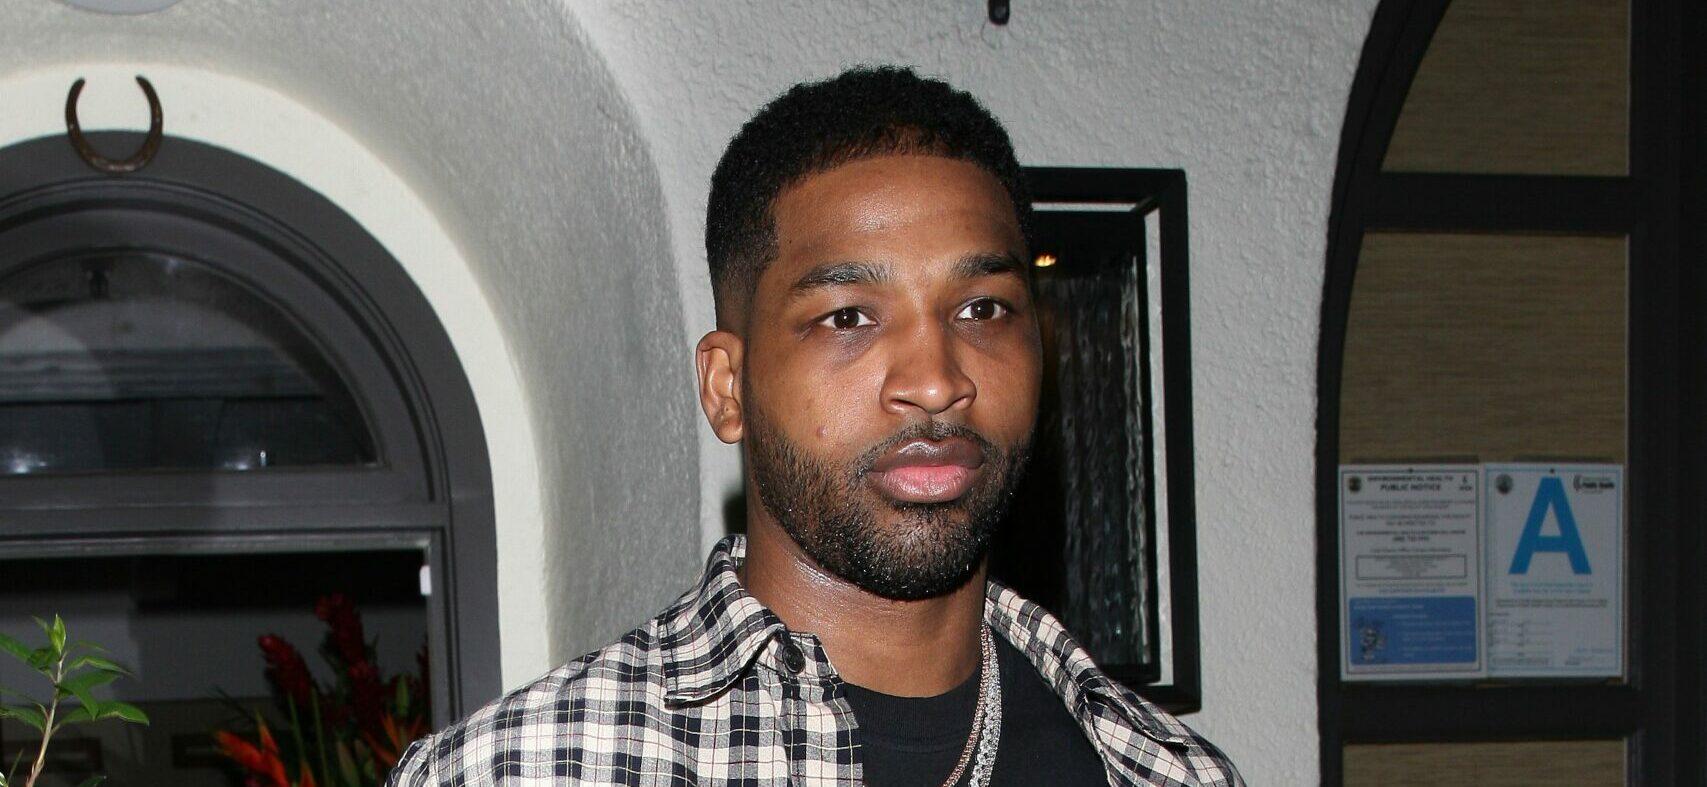 Maralee Nichols Accuses Tristan Thompson Of Not Supporting Their Son